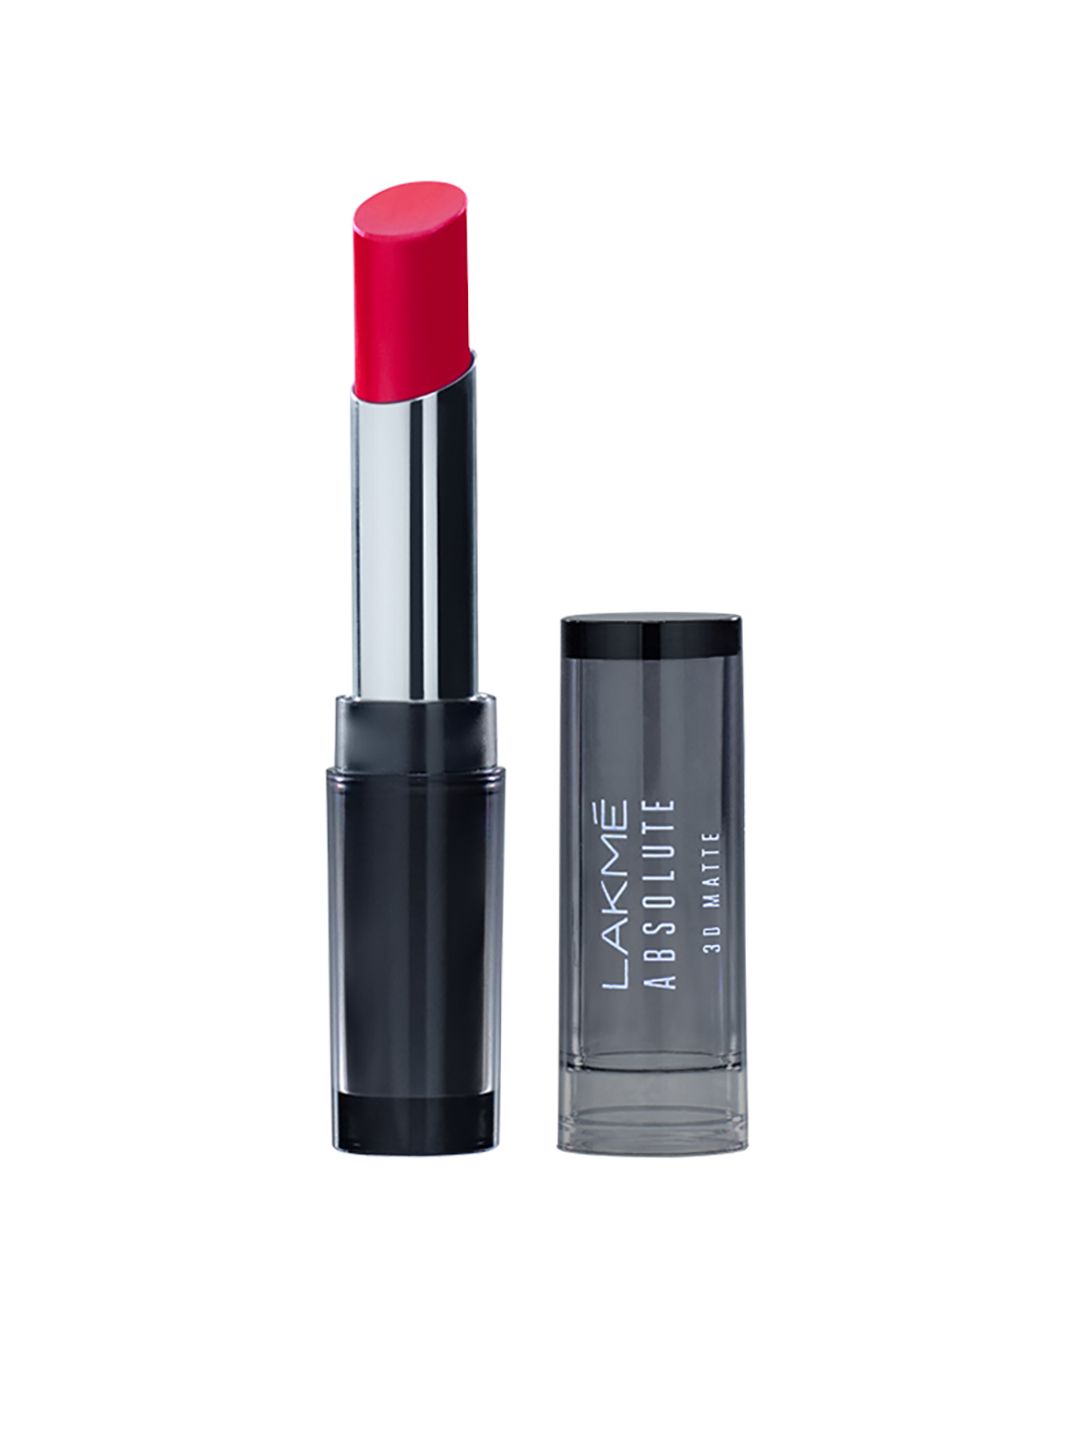 Lakme Absolute 3D Matte Lip Color - Romeo Red 01 3.6 g Price in India